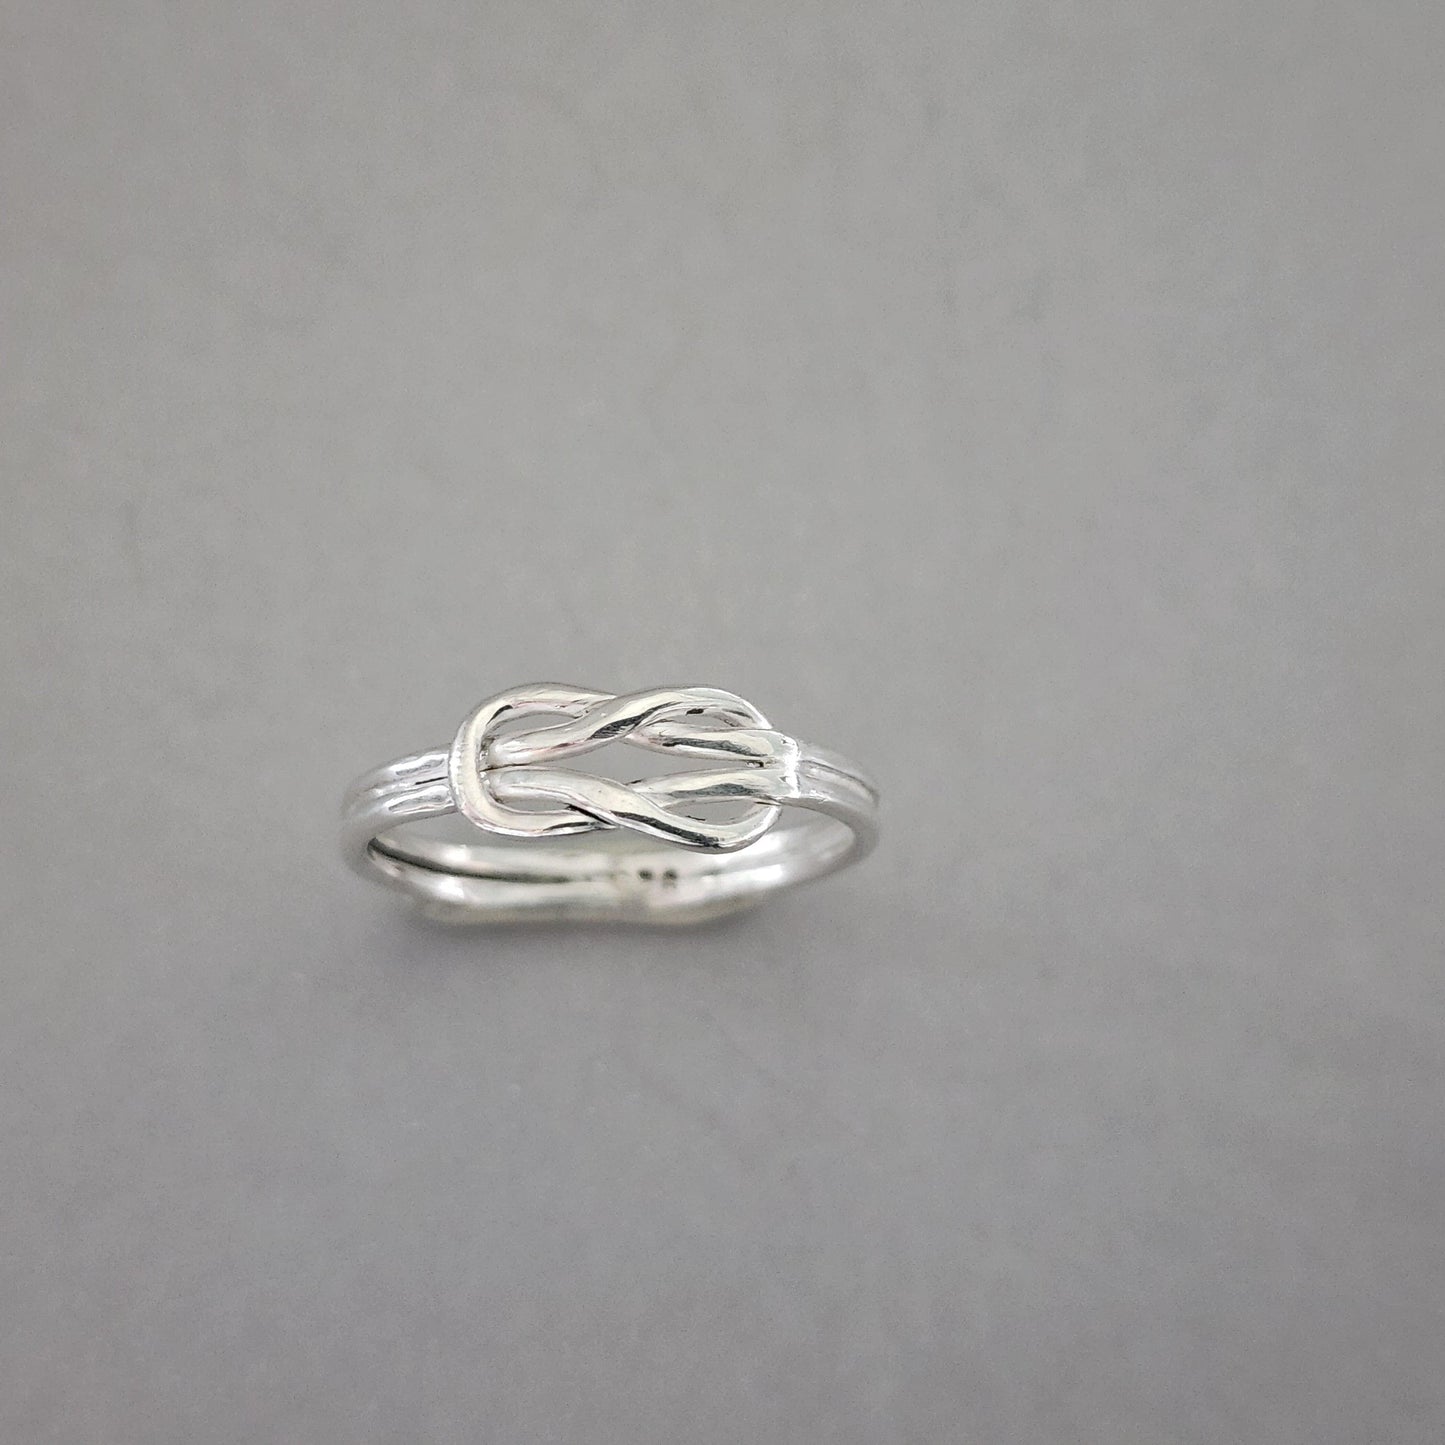 Handmade Womans Sterling Silver Love Knot Ring - Gilded Heart Designs